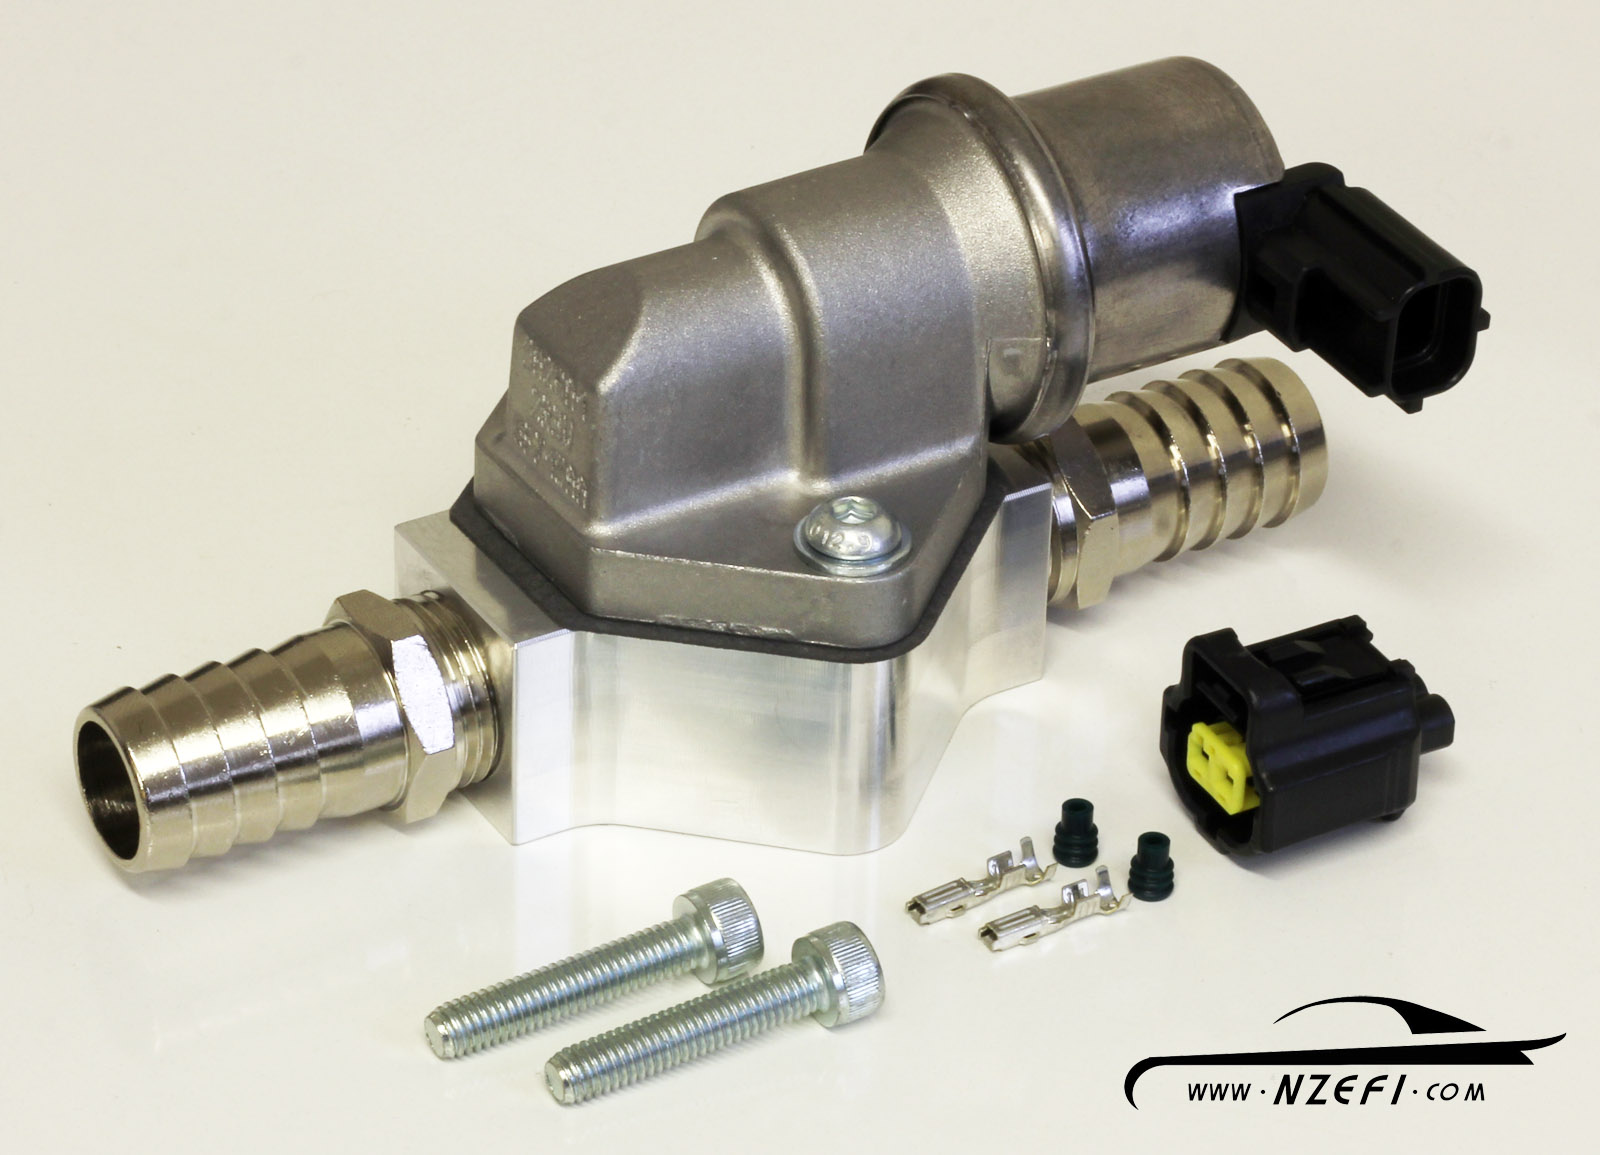 2-Wire Idle Speed Solenoid Kit with Remote Mount and Straight Barb Fittings...